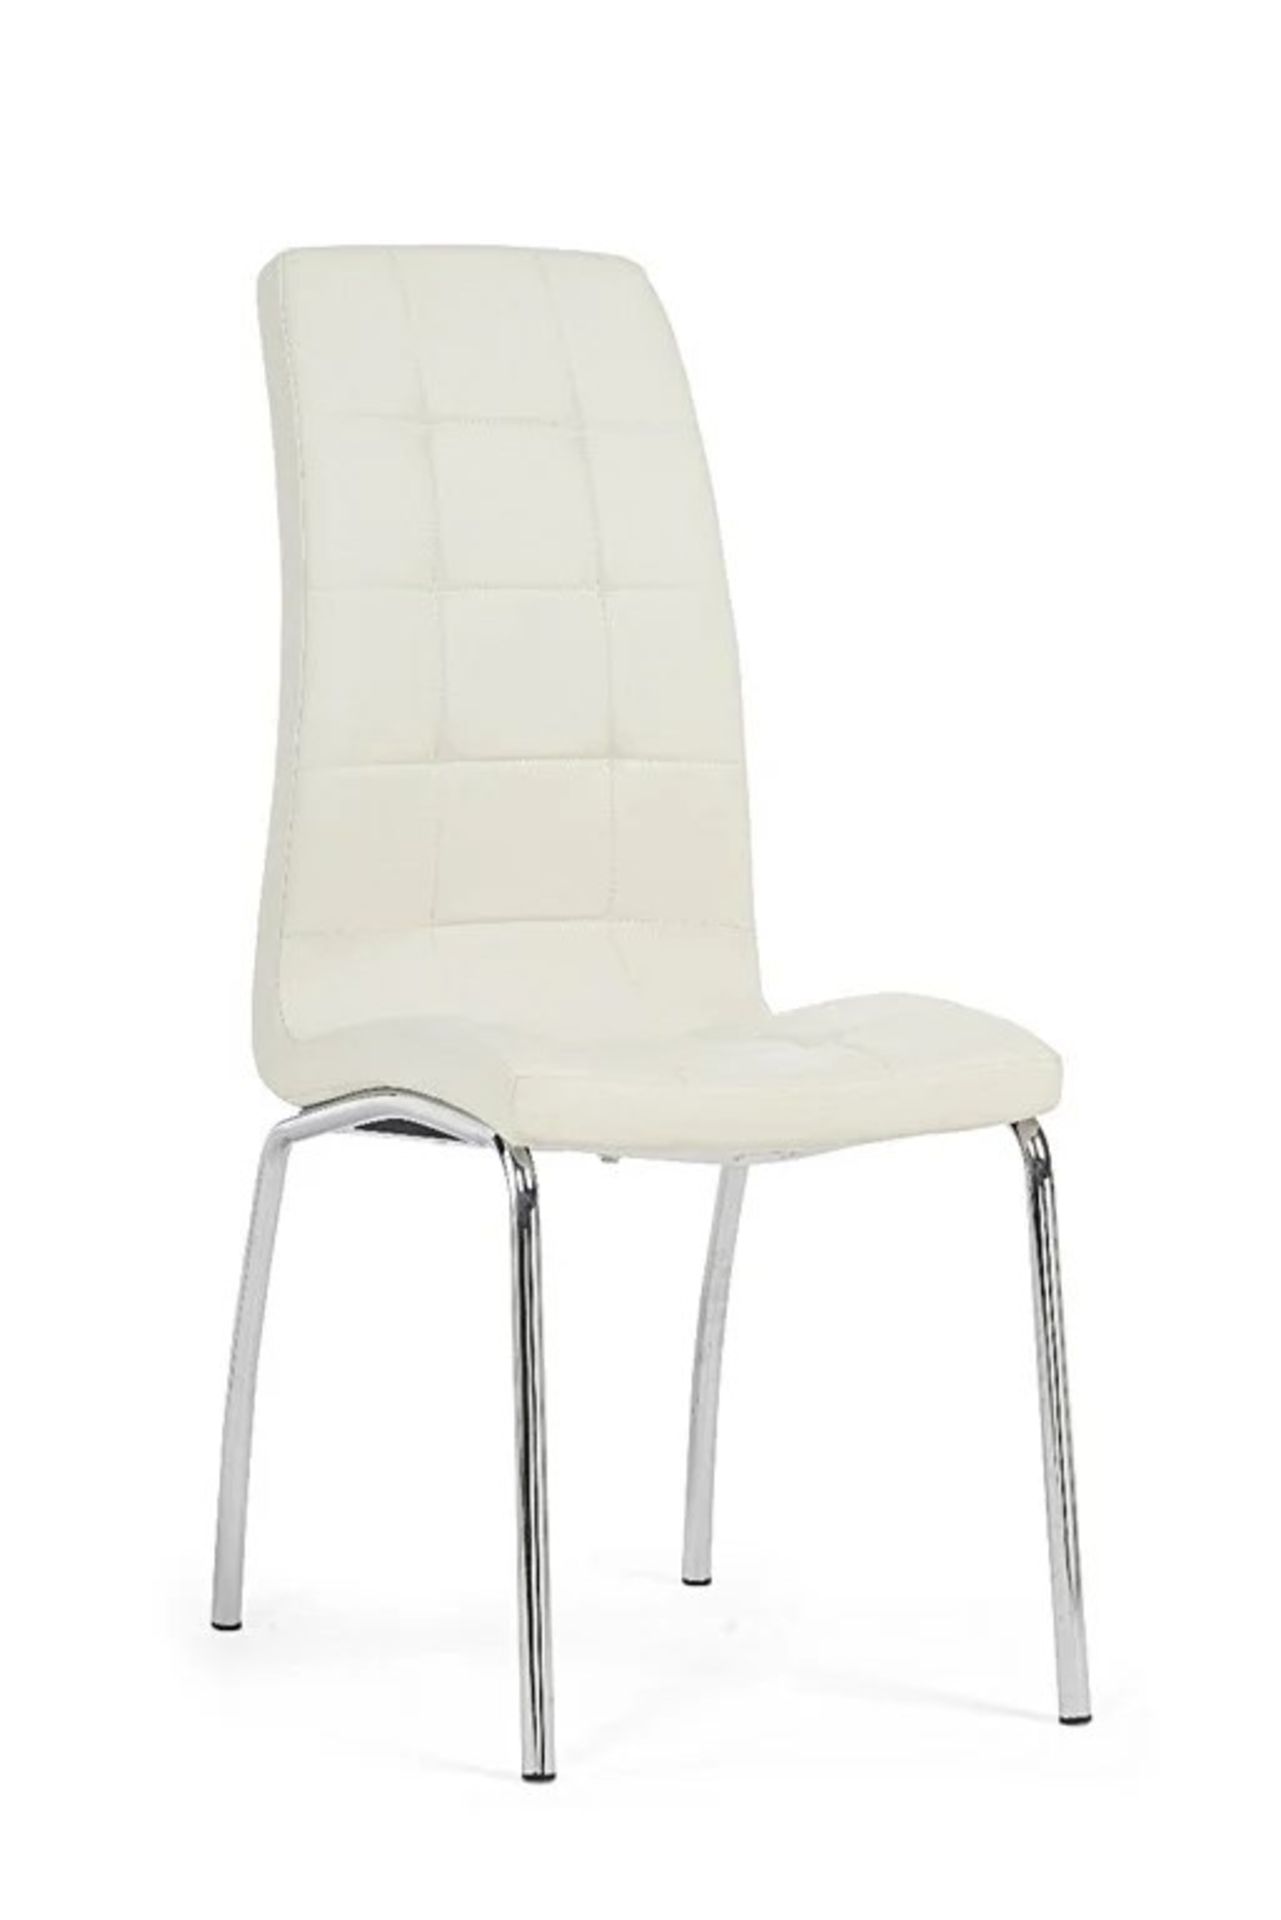 A Set of 6 x Calgary White Faux Leather Dining Chairs Stylishly angled chrome legs support faux